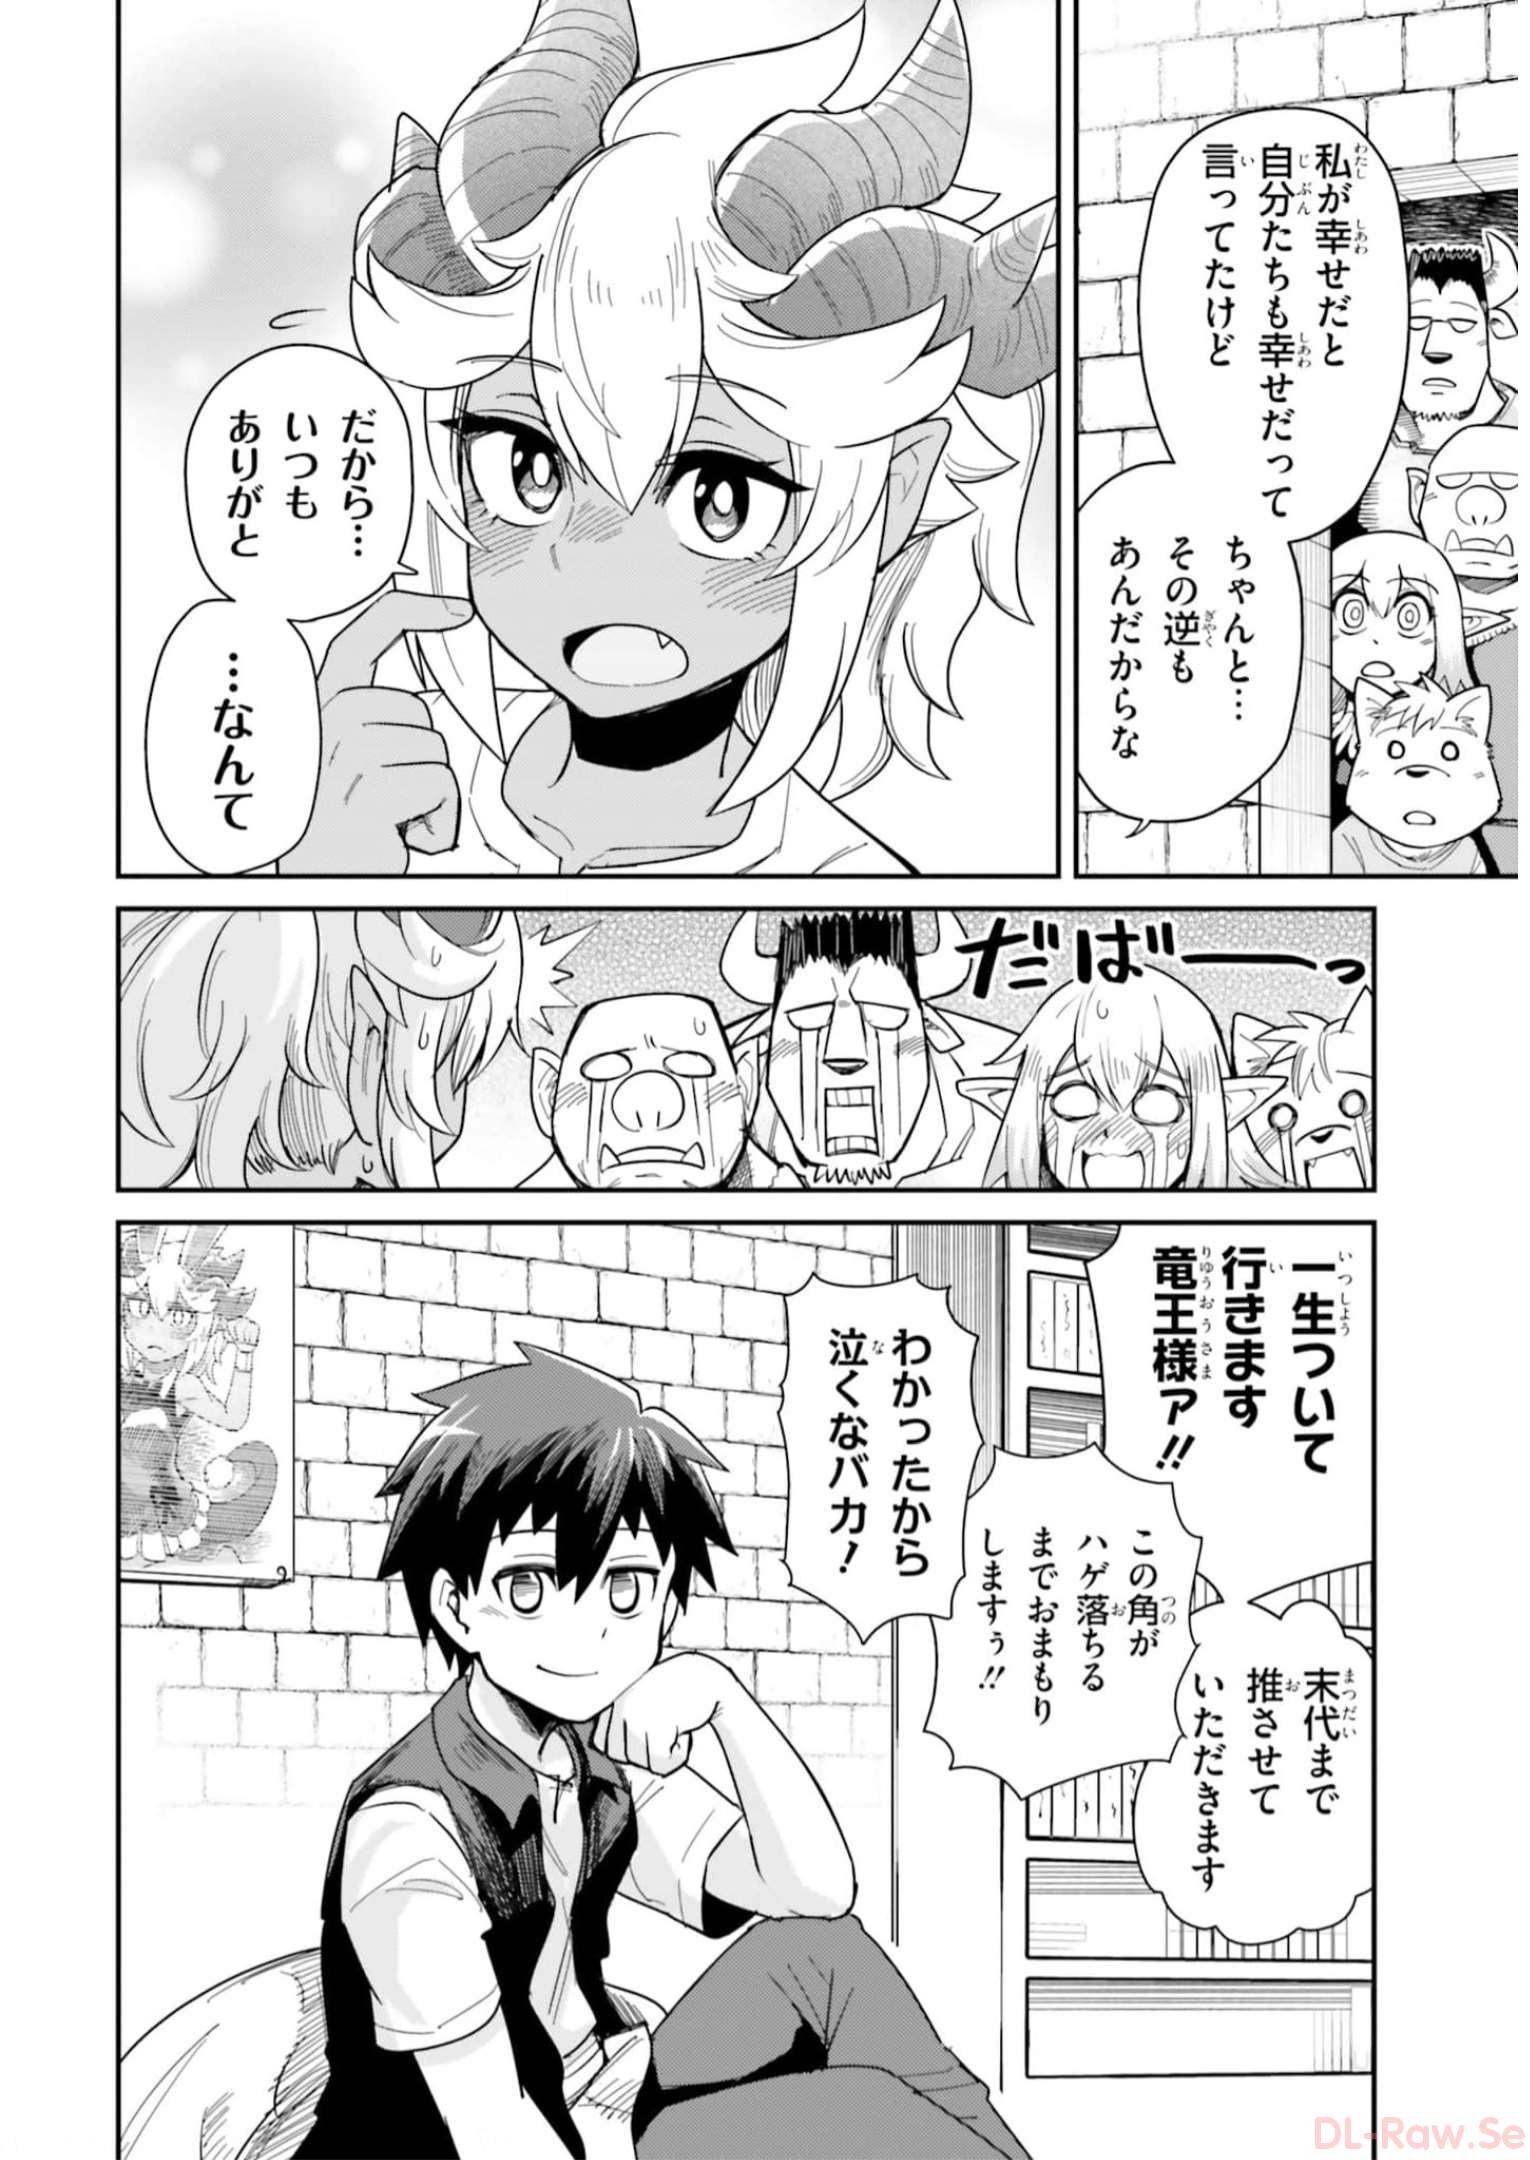 Dungeon Friends Forever Dungeon's Childhood Friend ダンジョンの幼なじみ 第22話 - Page 17